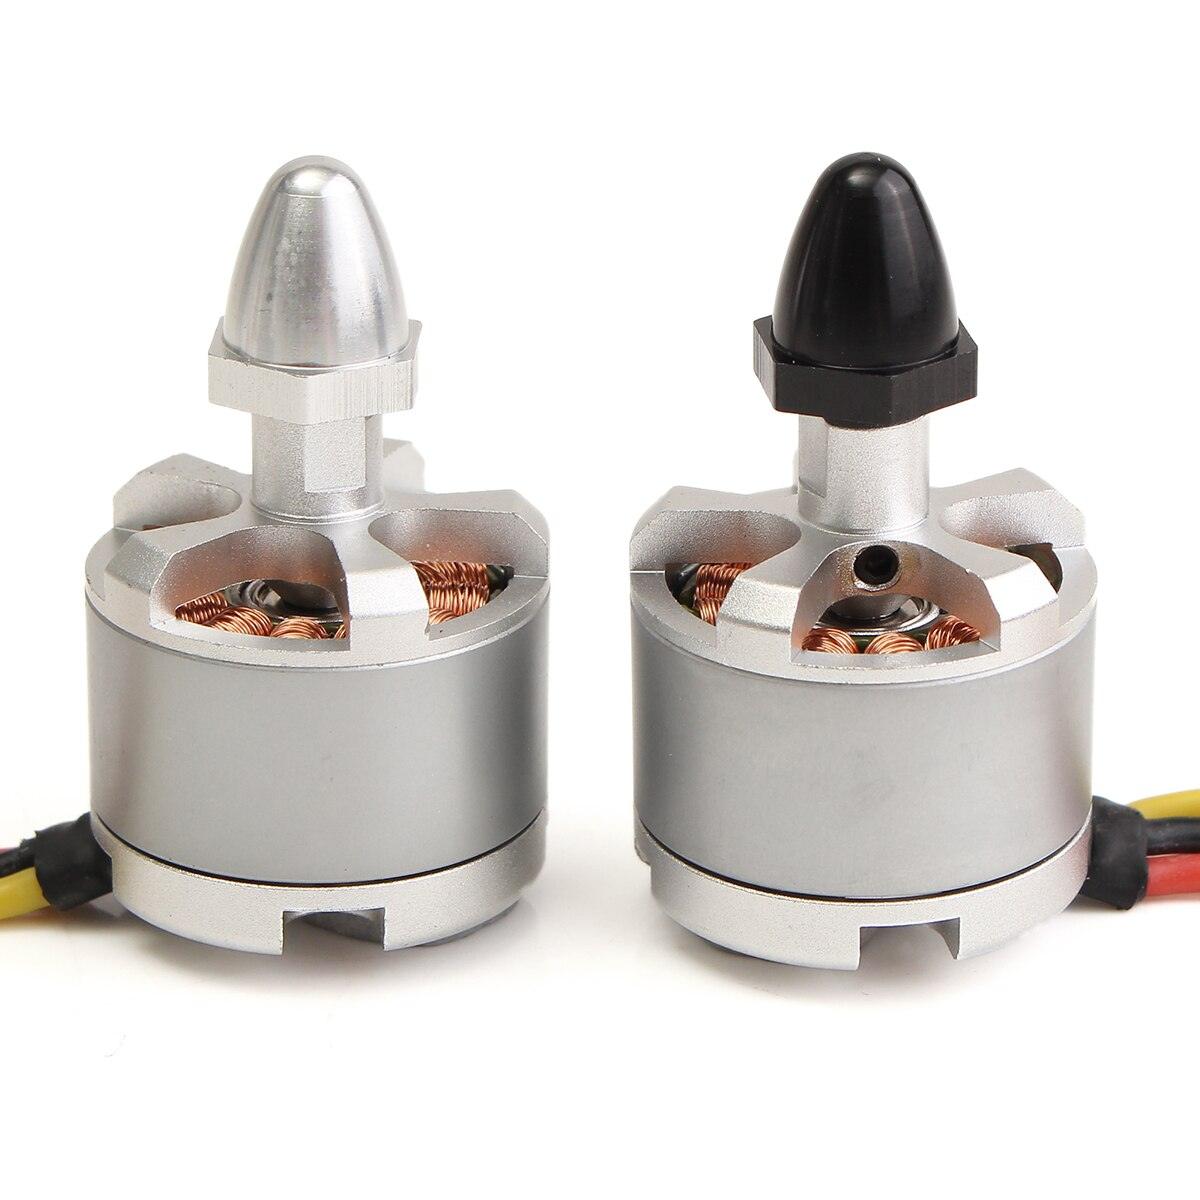 CW/CCW Brushless Motor 2212 920KV for 3-4S RC Quadcopter for DJI Phantom F330 F450 F550 X525 Cheerson CX-20 Drone CW/CCW Motor - RCDrone